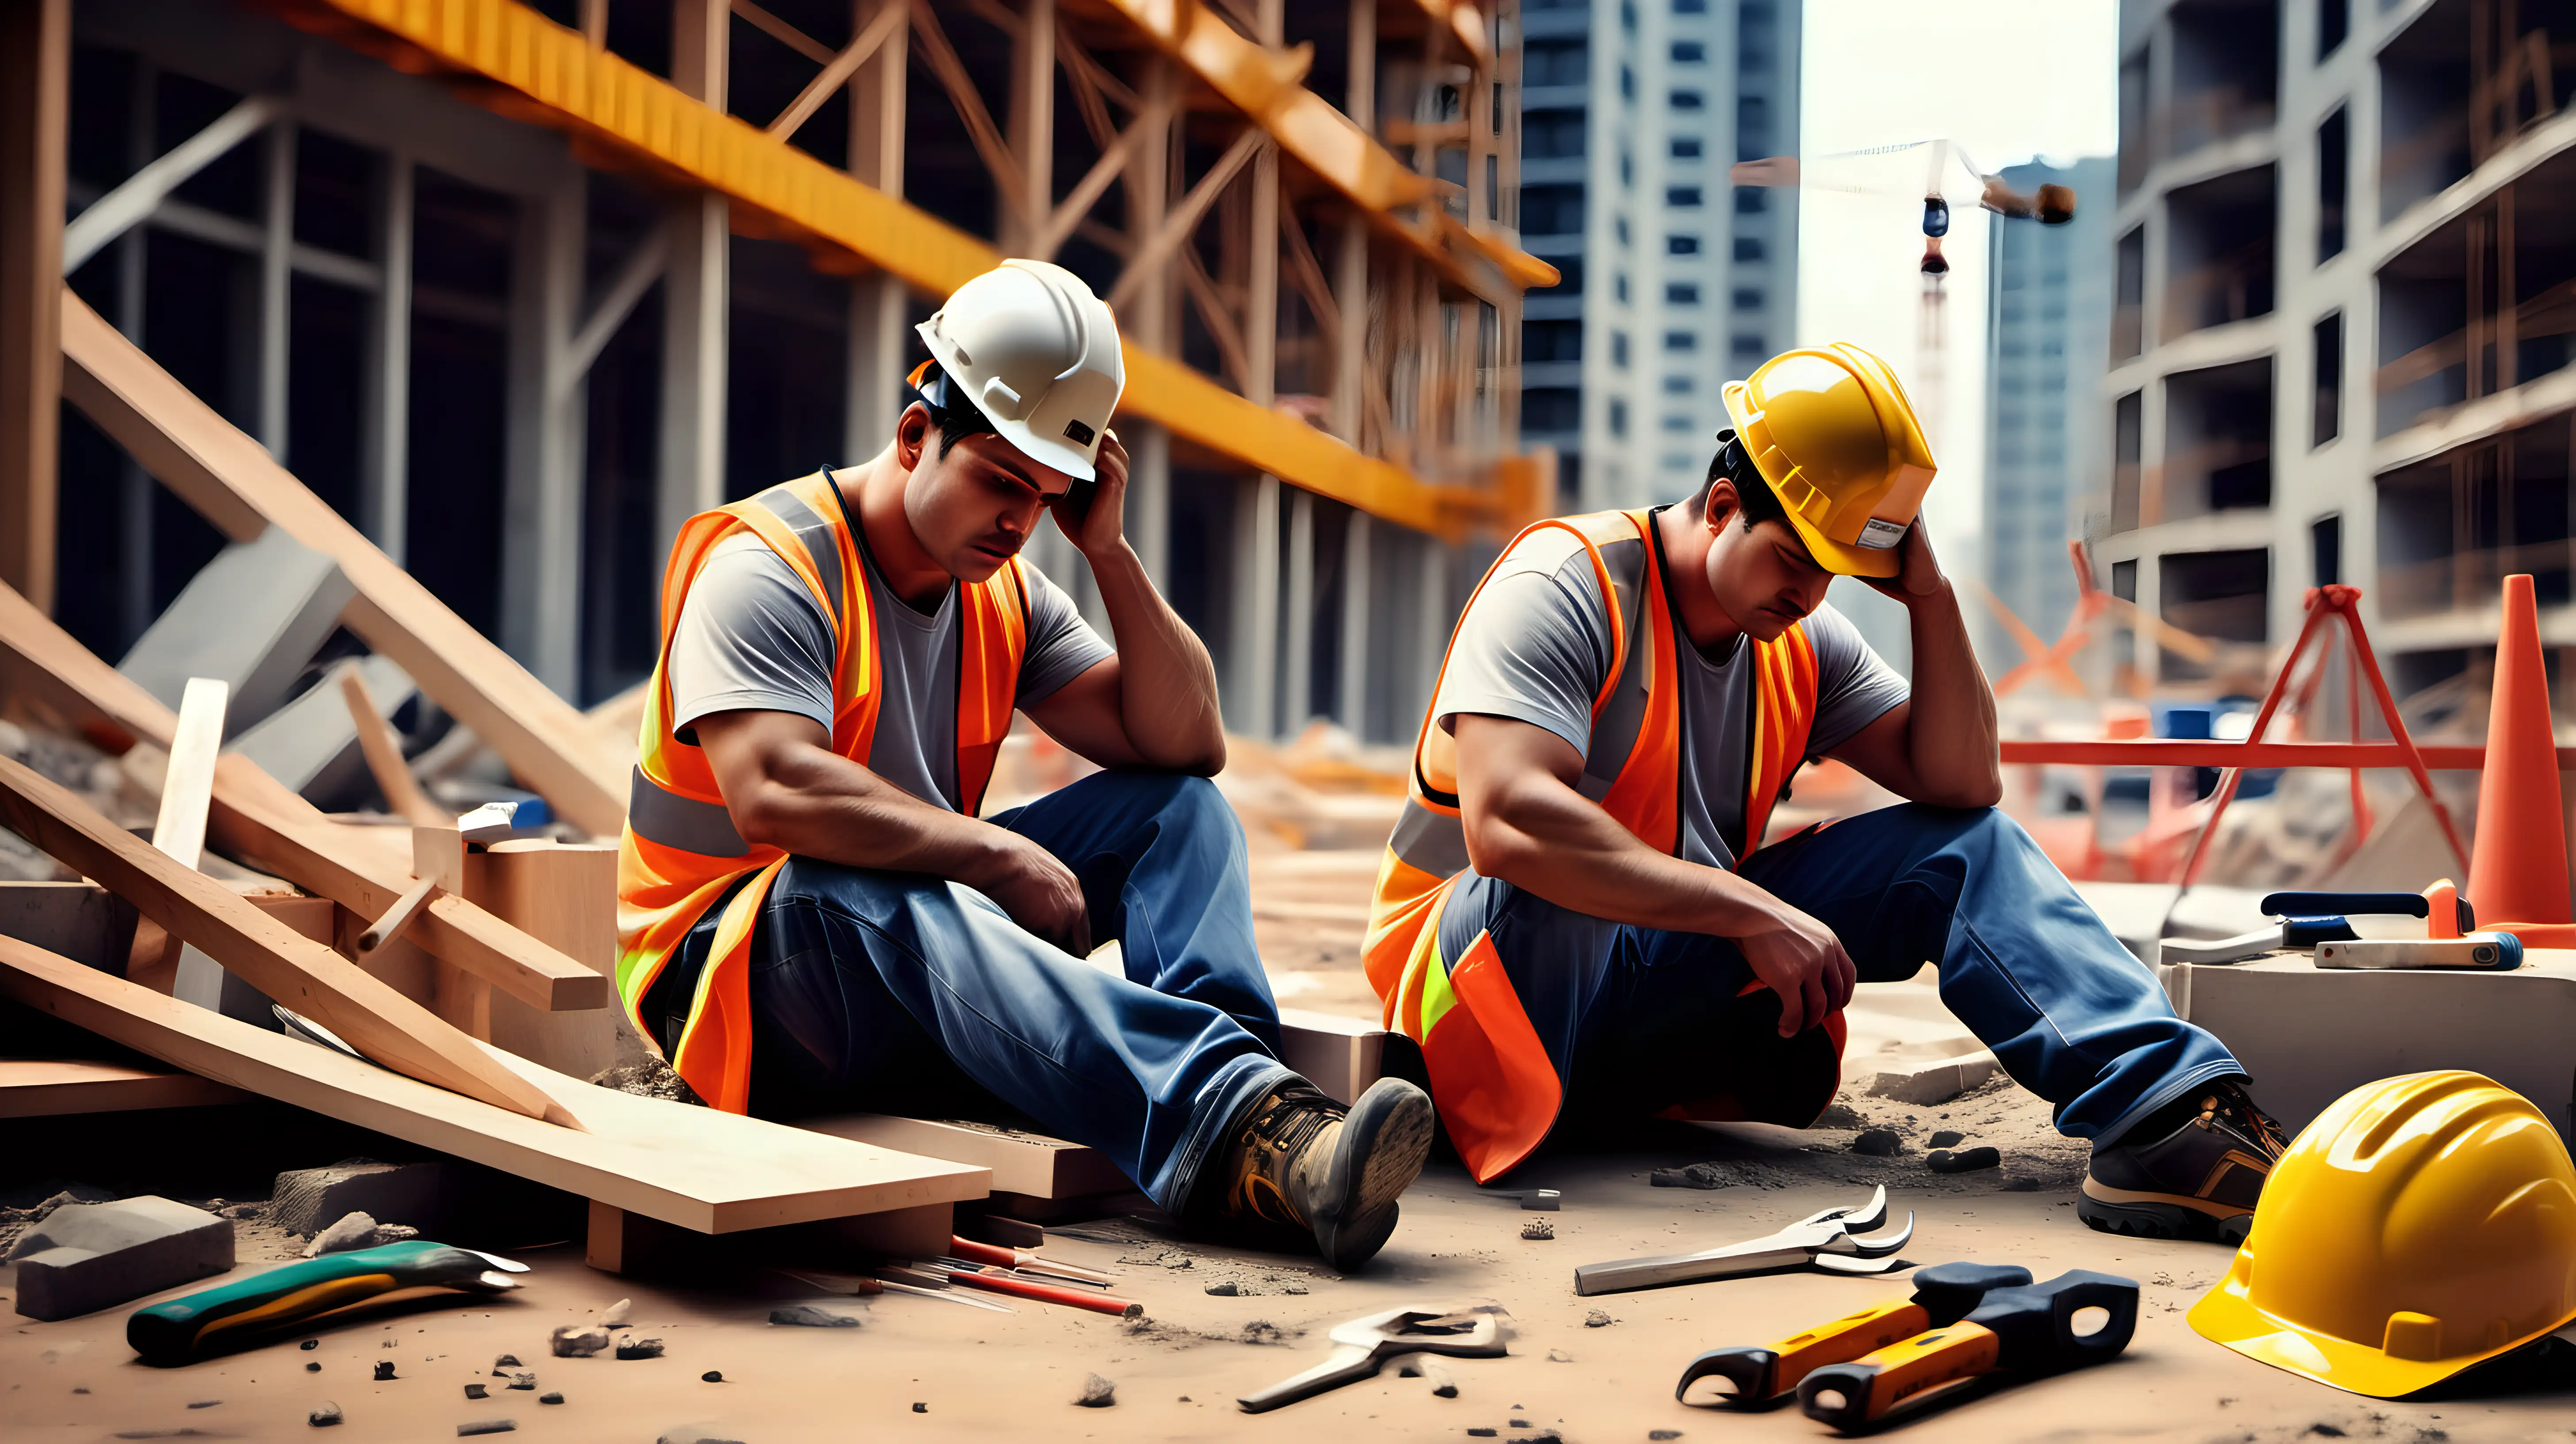 Construction Worker Resting Amidst Tools on Construction Site